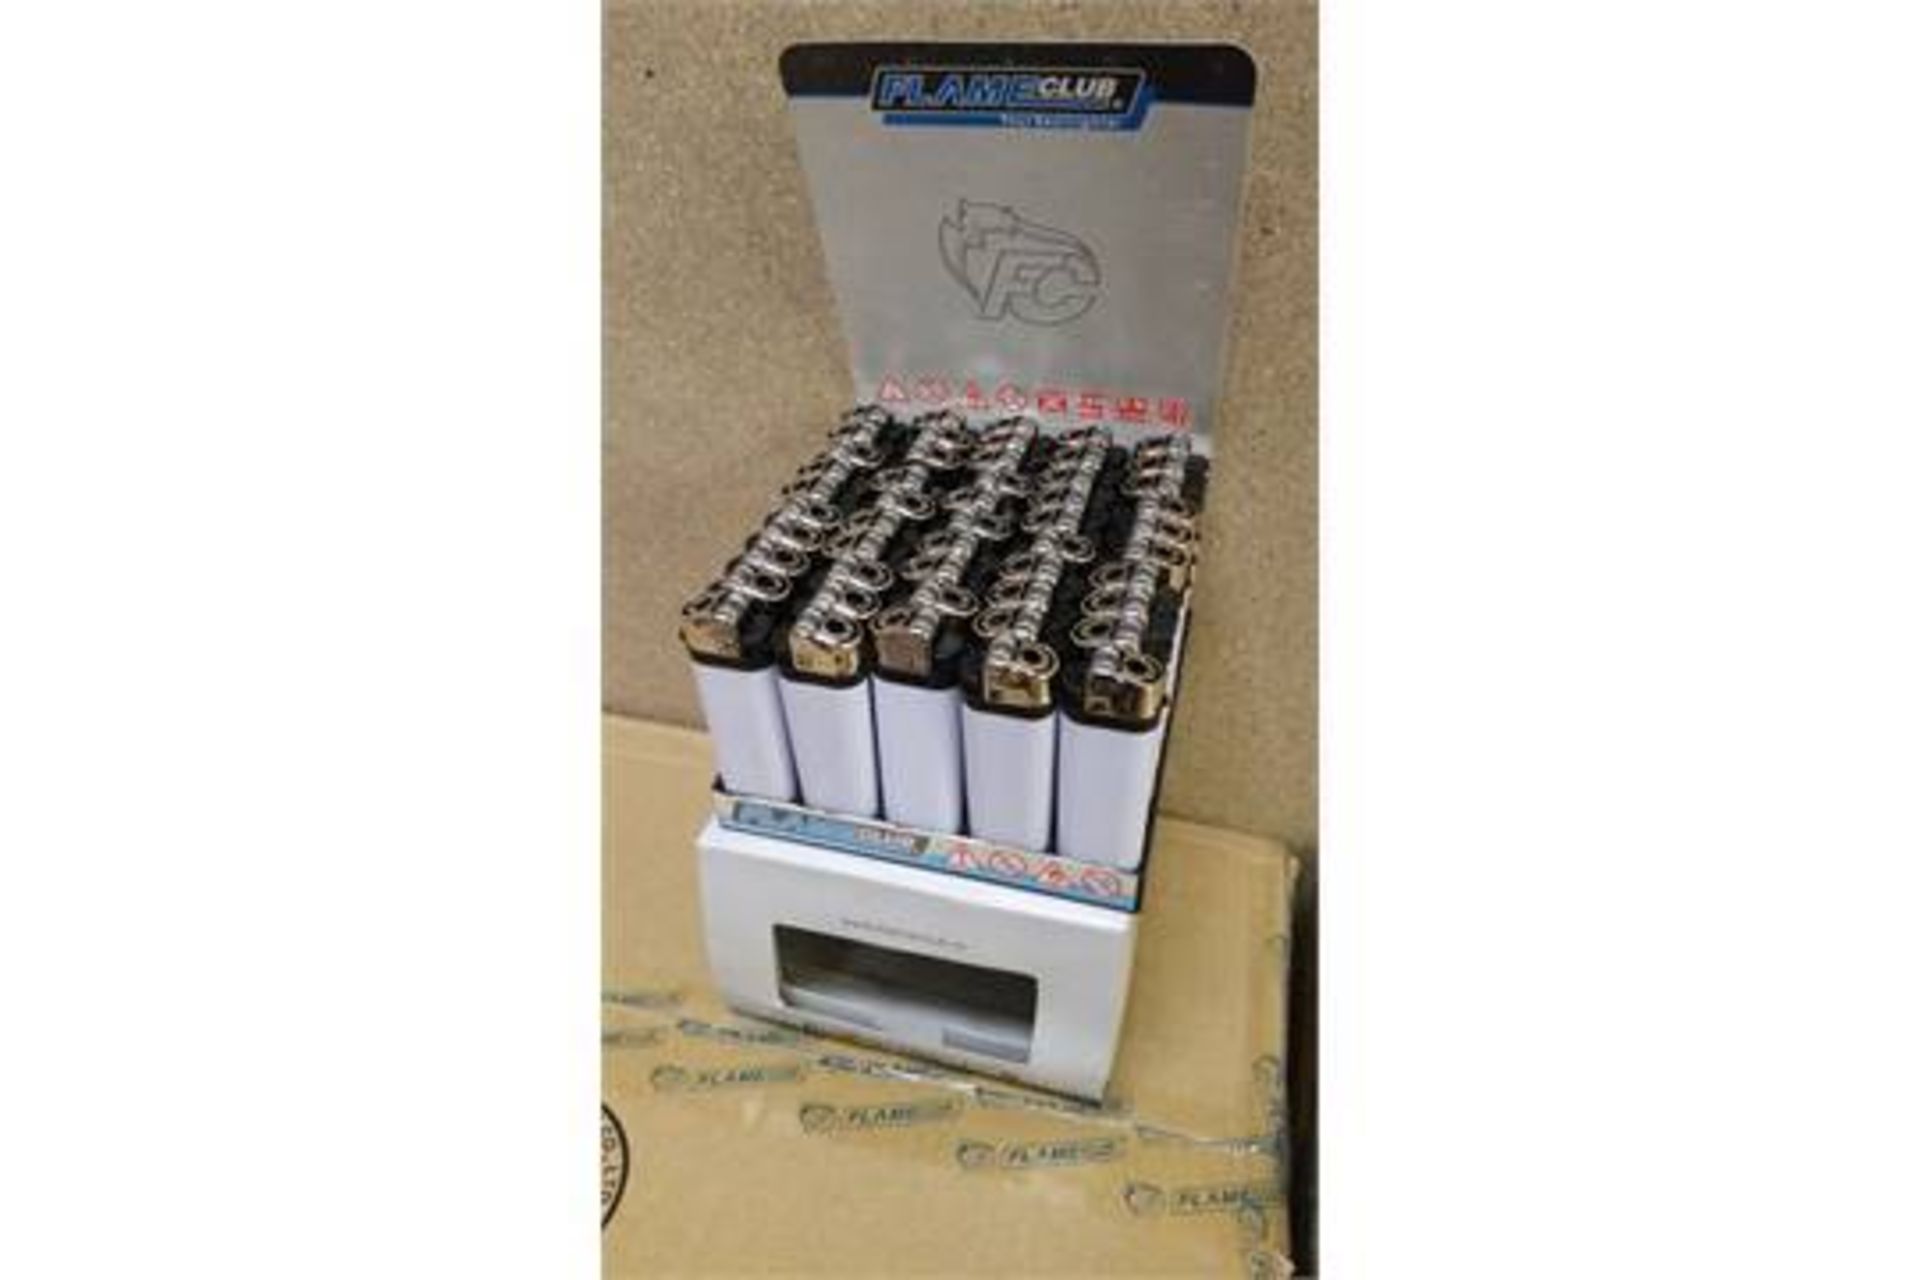 X10 BOXES OF BRAND NEW LIGHTERS EACH BOX CONTAINS 50 LIGHTERS EACH RETAILING AT 85p